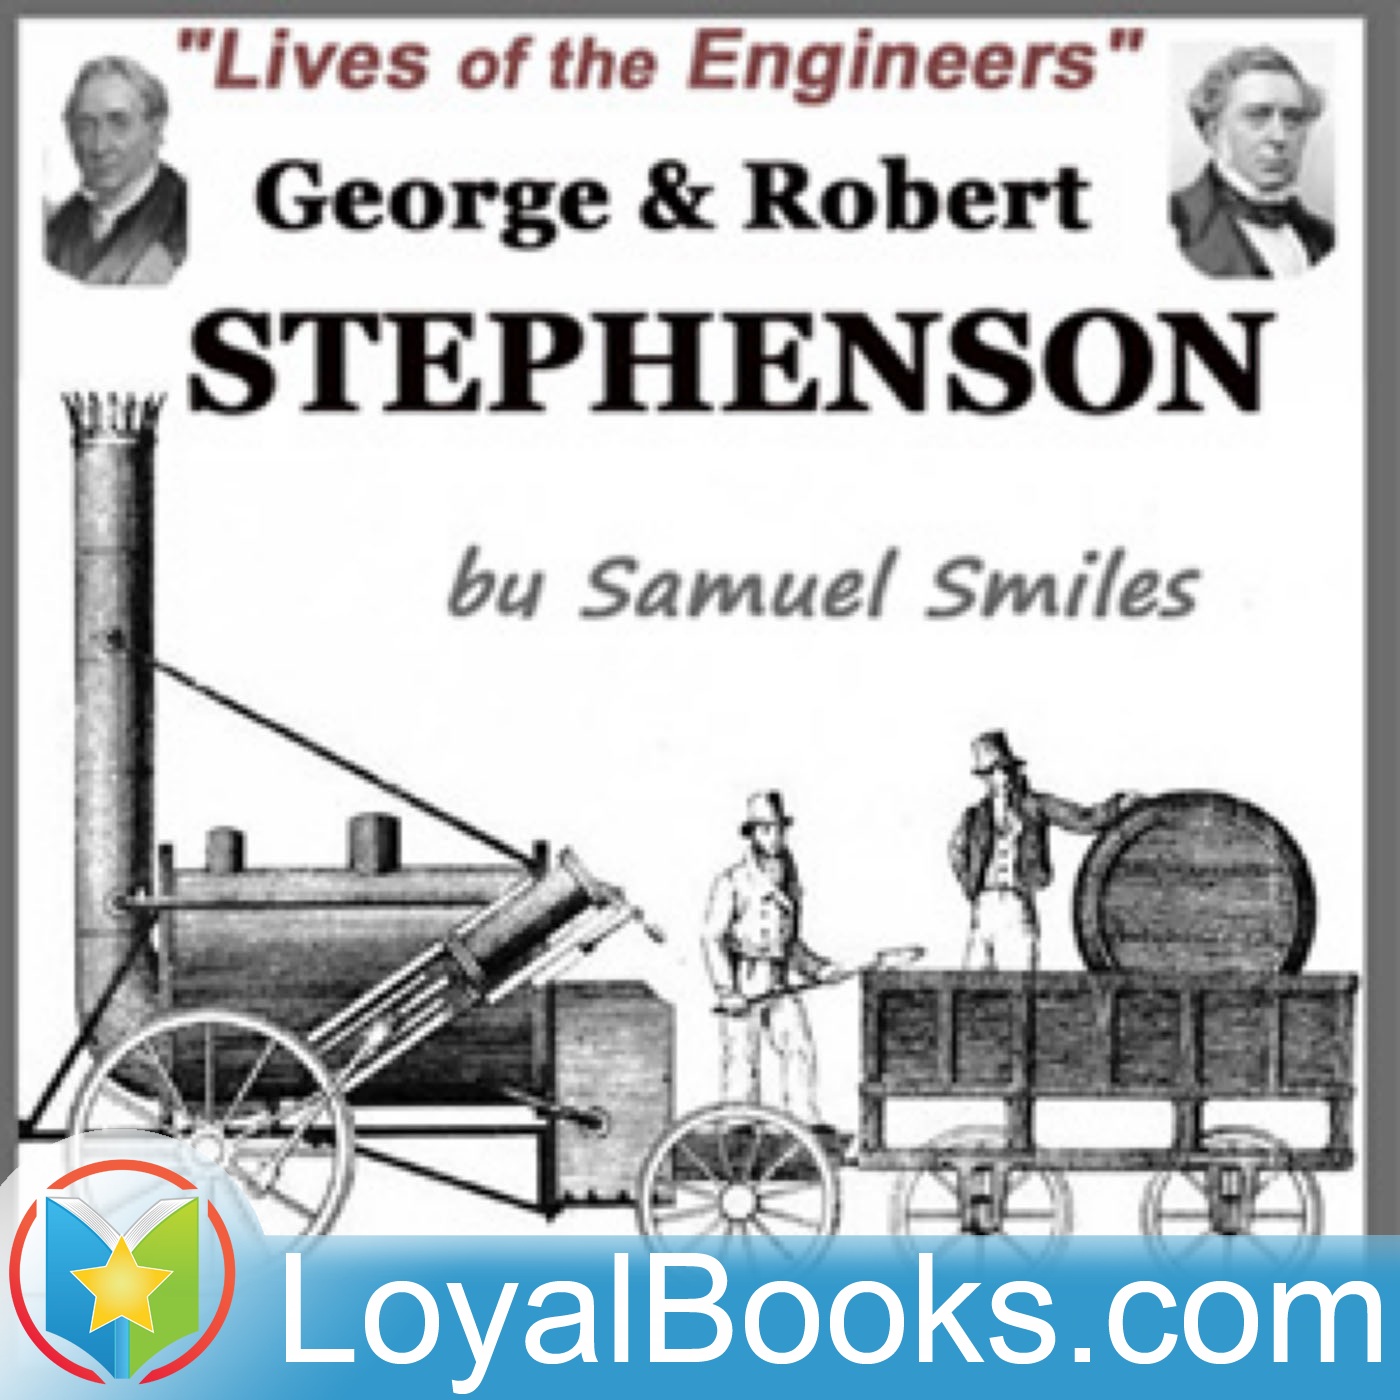 Lives of the Engineers (George and Robert Stephenson) by Samuel Smiles